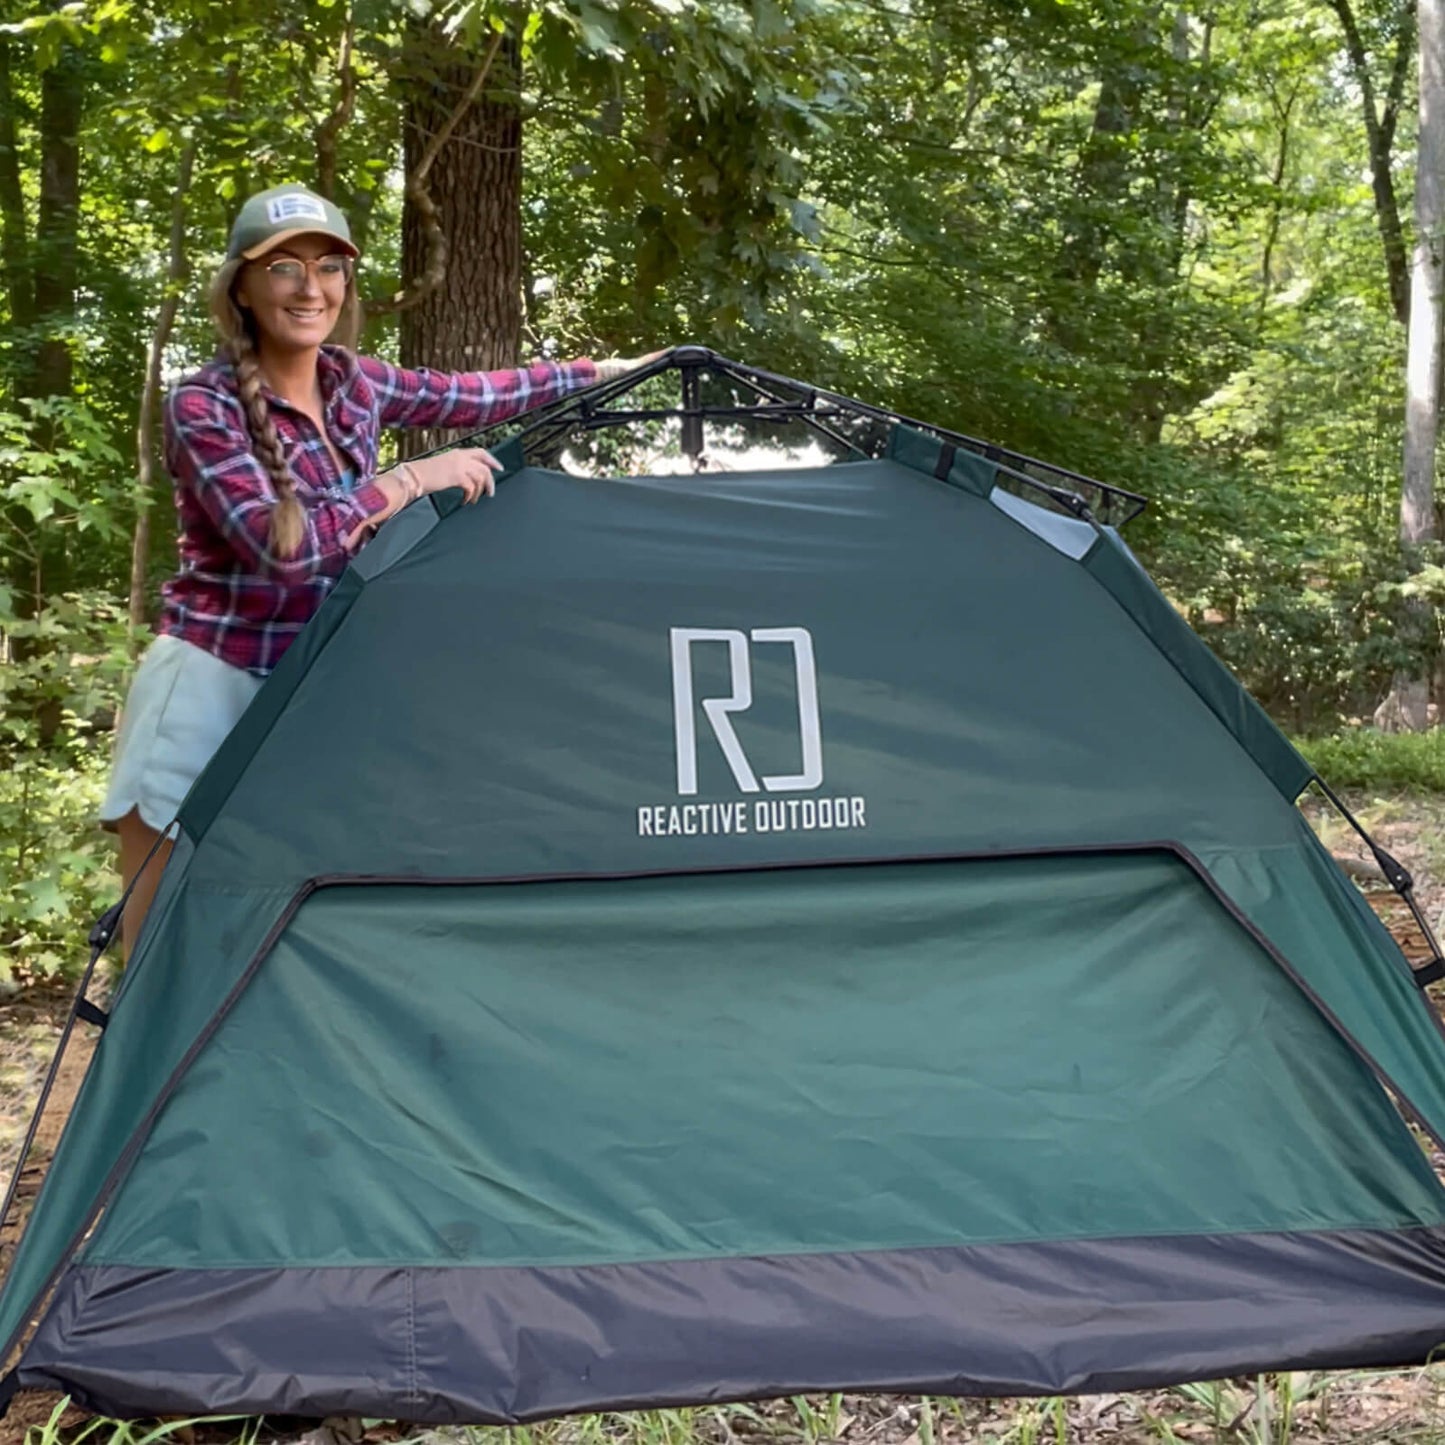 Large-Sized 3 Secs Tent + FREE Camping Tarp (For 2-3 Person, UK)